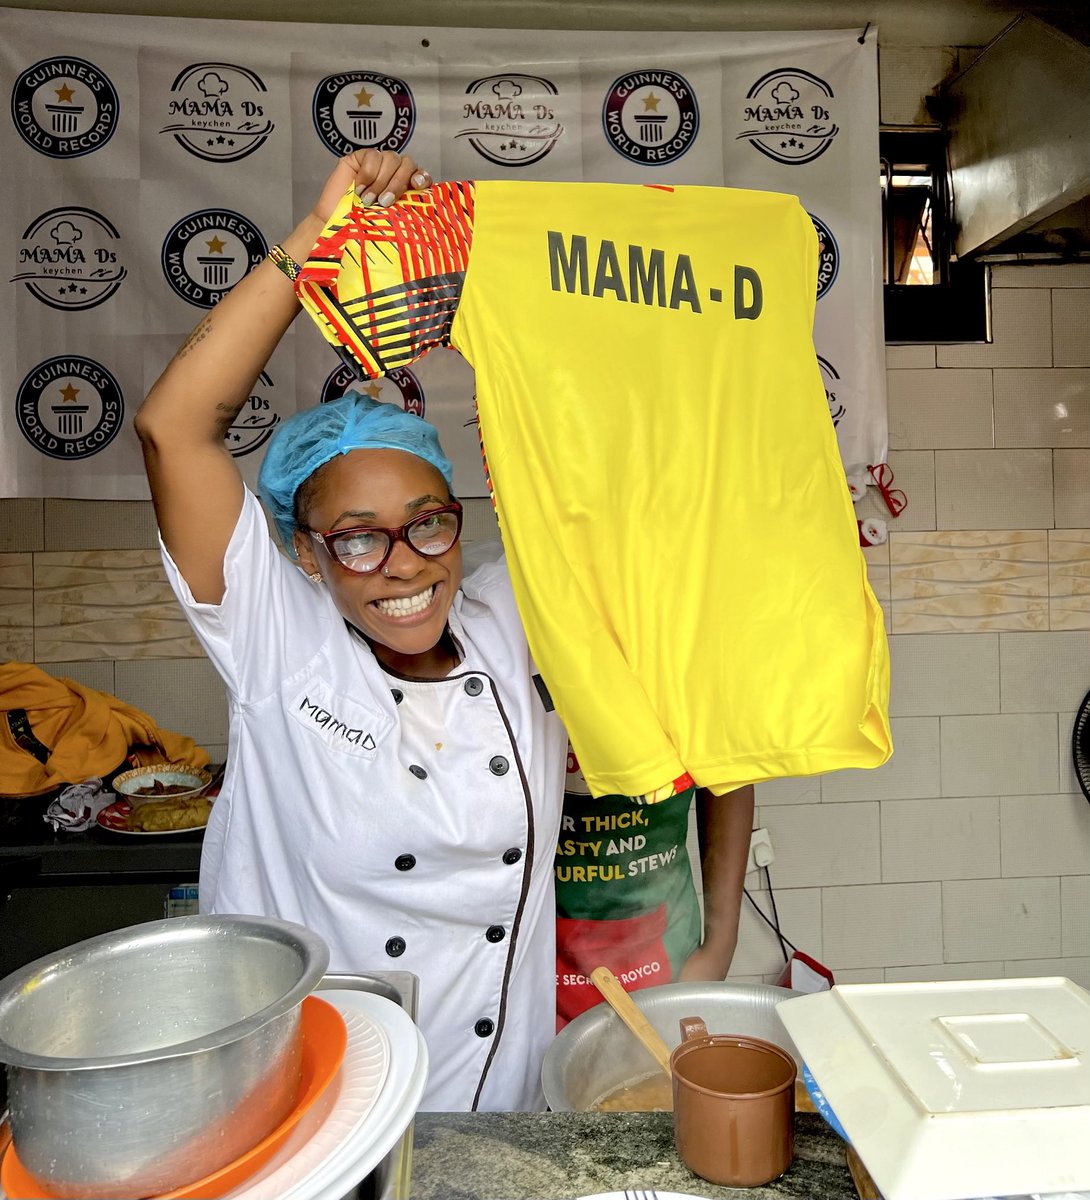 Ladies & gentlemen! @GWR winner for the longest cooking 🧑‍🍳 time! Congratulations @Mama_d256 We are so proud of you! 👏🏽 🇺🇬 #MamaDsWorldRecord